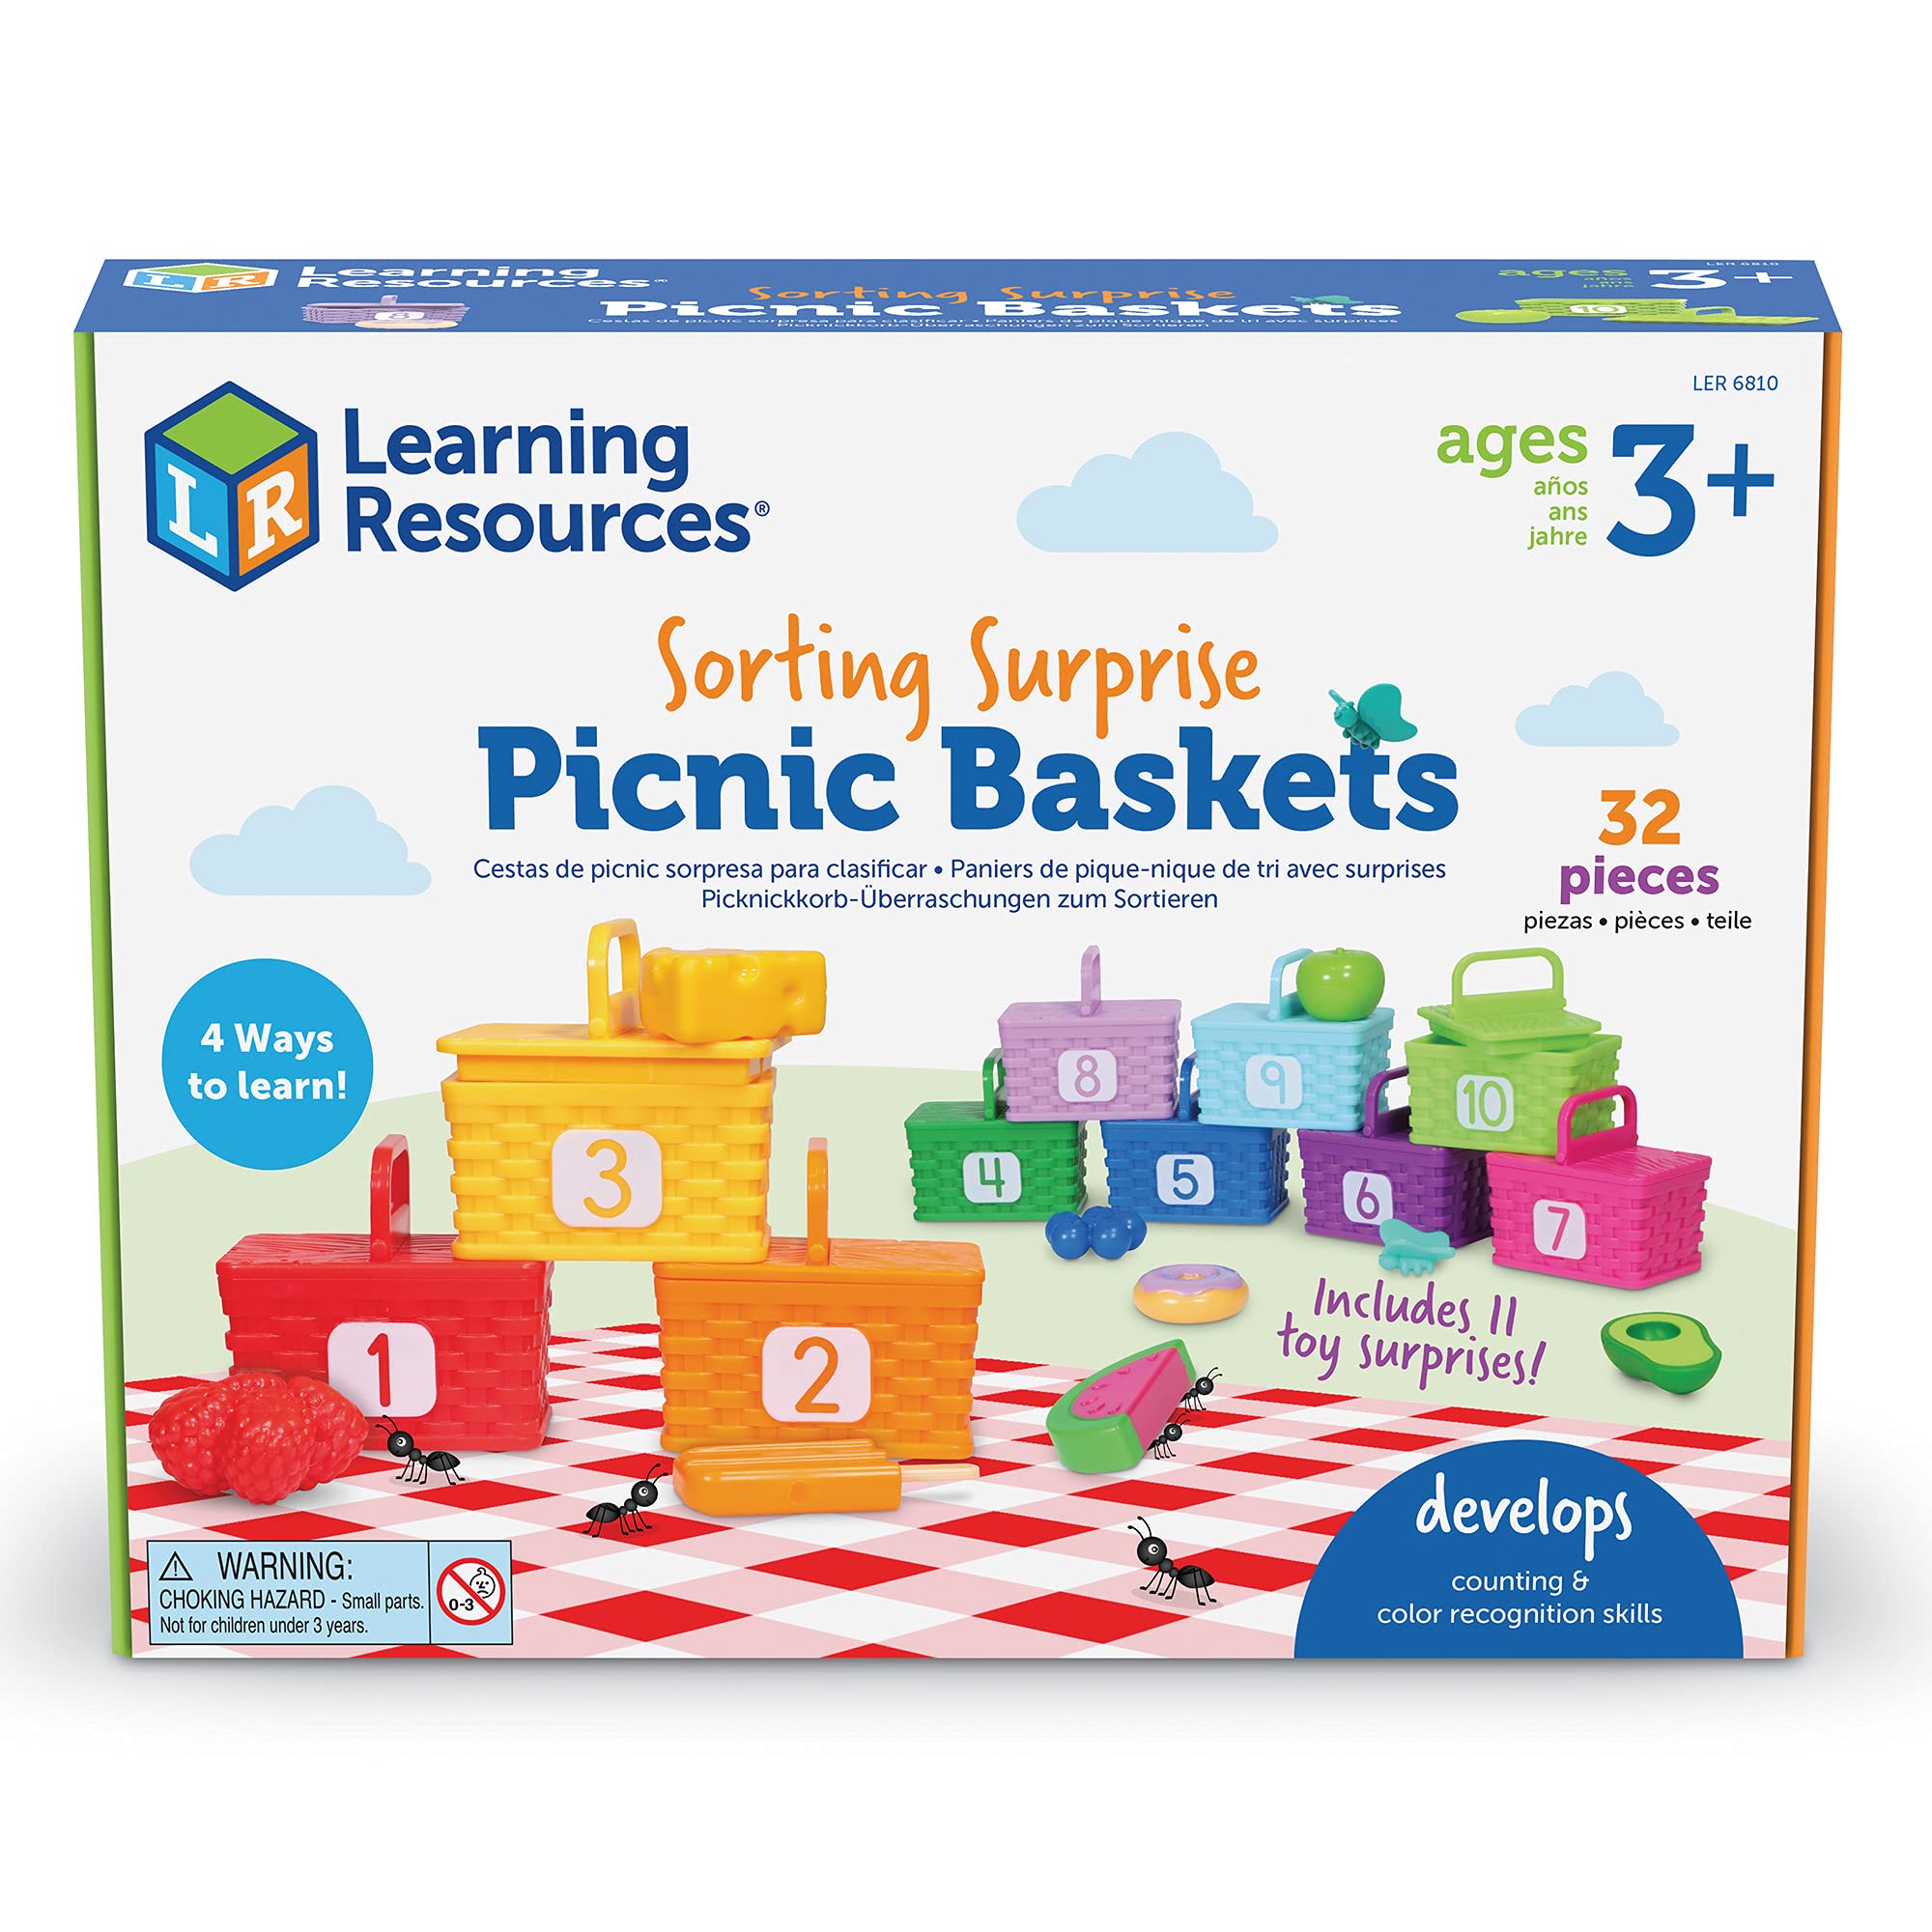 Learning Resources Sorting Surprise Picnic Baskets, Toddler Sorting & Matching Skills Toy, Fine Motor Skills, Preschool Educational Toys, 32 Pieces, Ages 3+